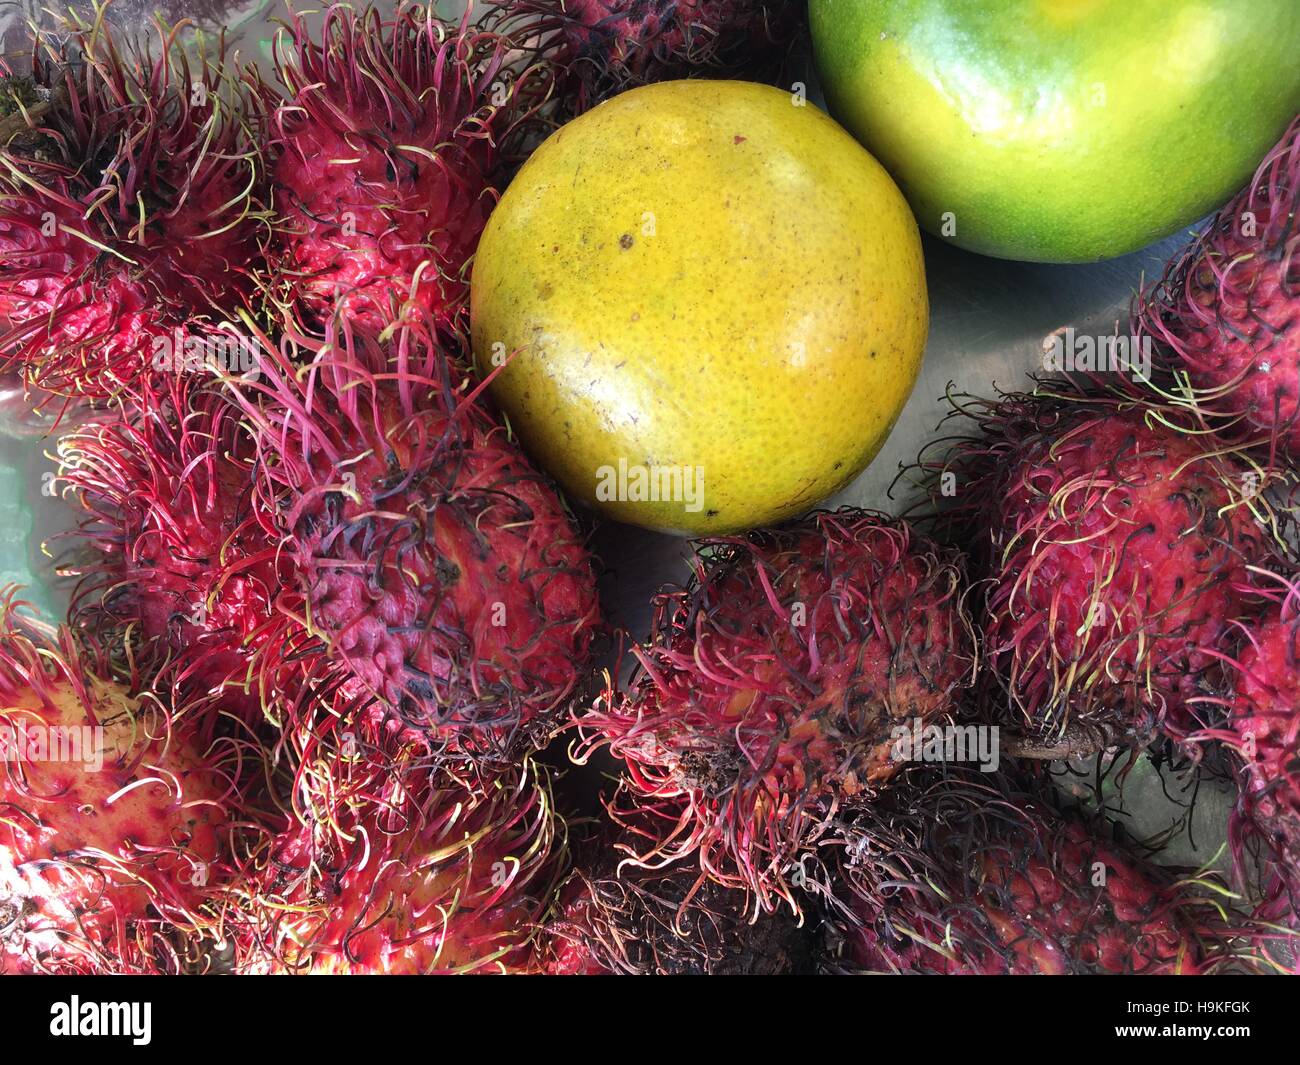 Asian fruits in a plate on a table : Lychee, Lemon , Lime. Round and hairy fruit. Lychees Stock Photo